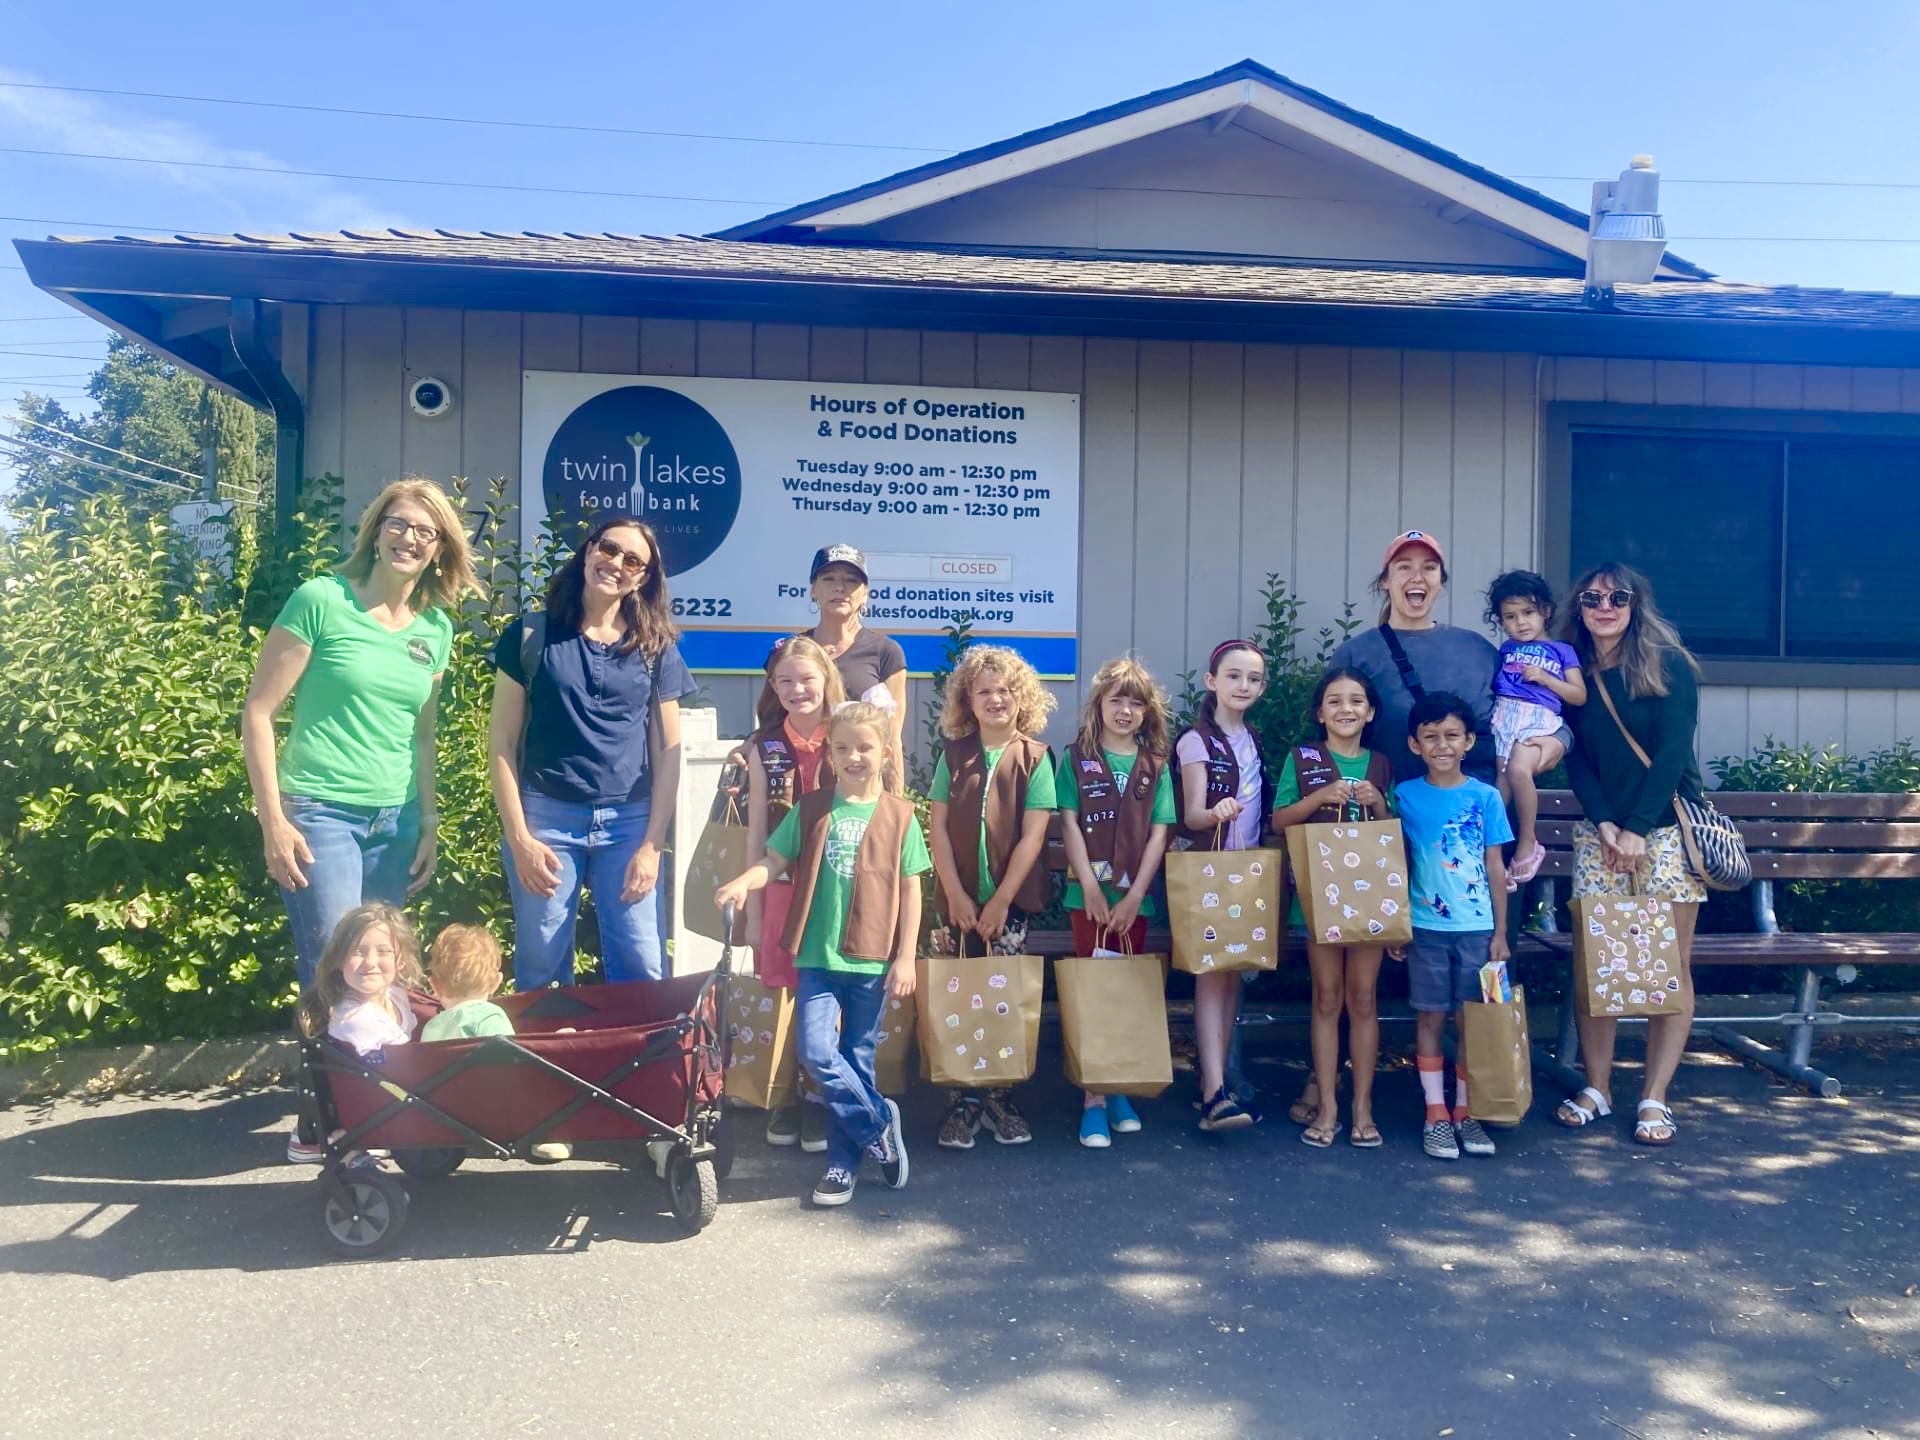 Folsom Girl Scouts make special contribution to Twin Lakes Food Bank